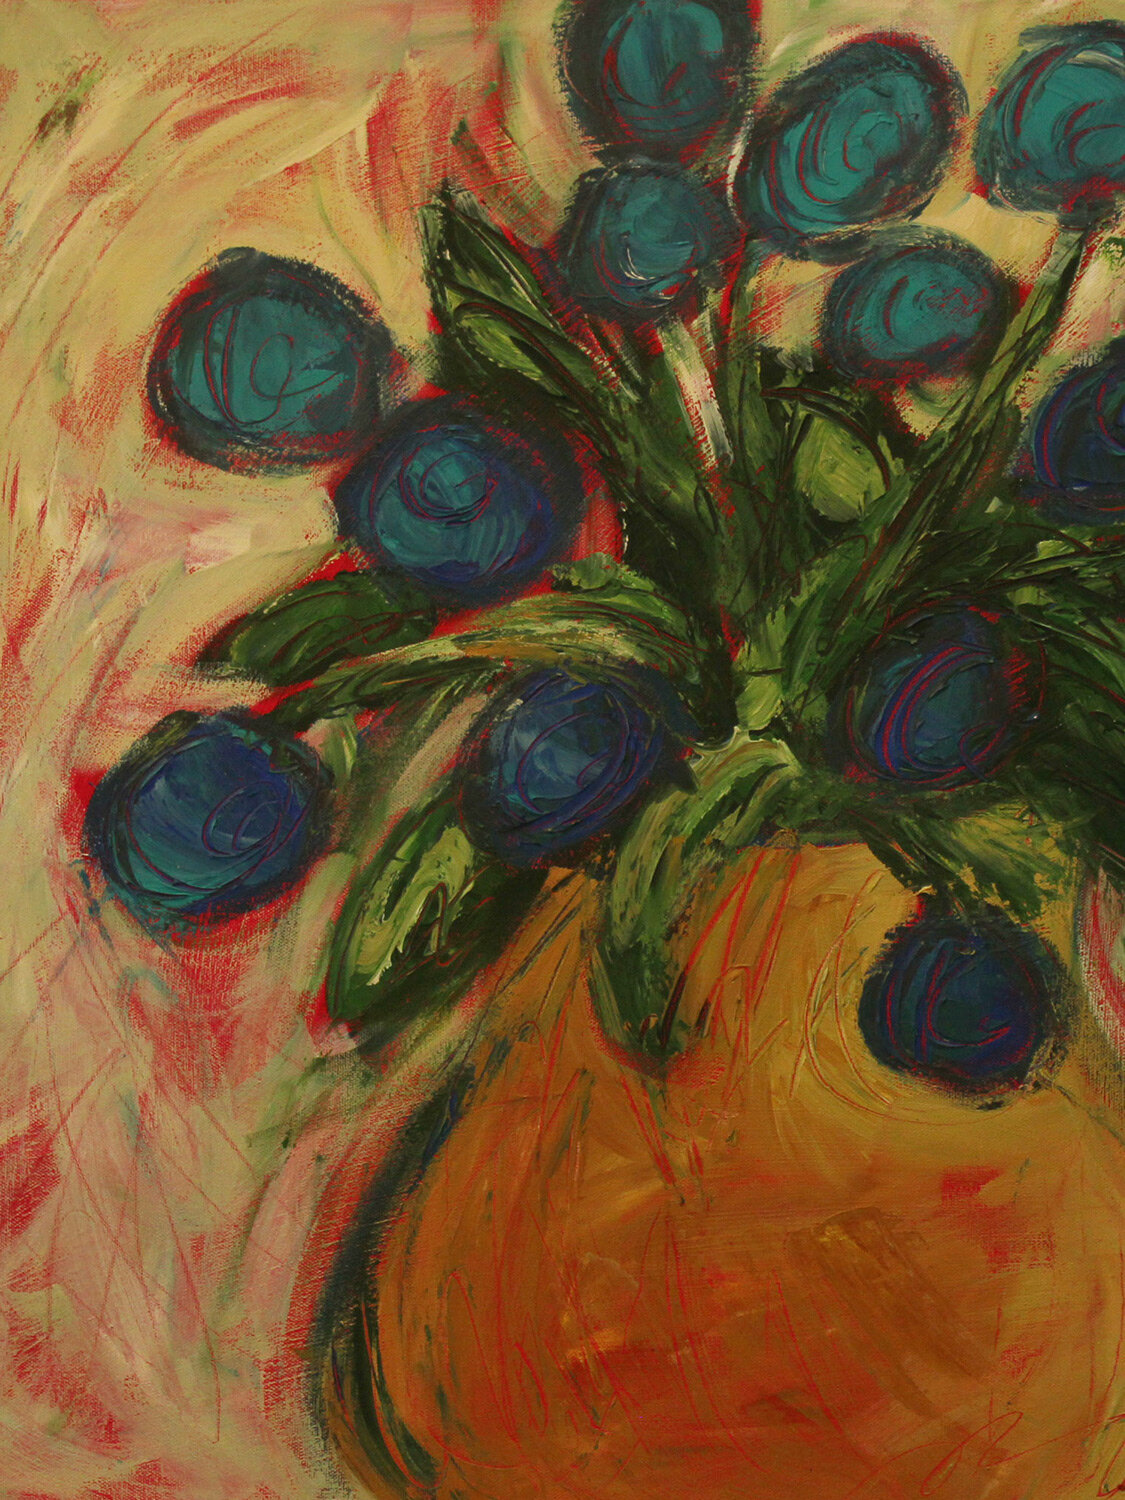 artist-tracey-j-marshall-blue-flowers-in-vase-abstract-acrylic-painting-greensboro-nc-144.jpg